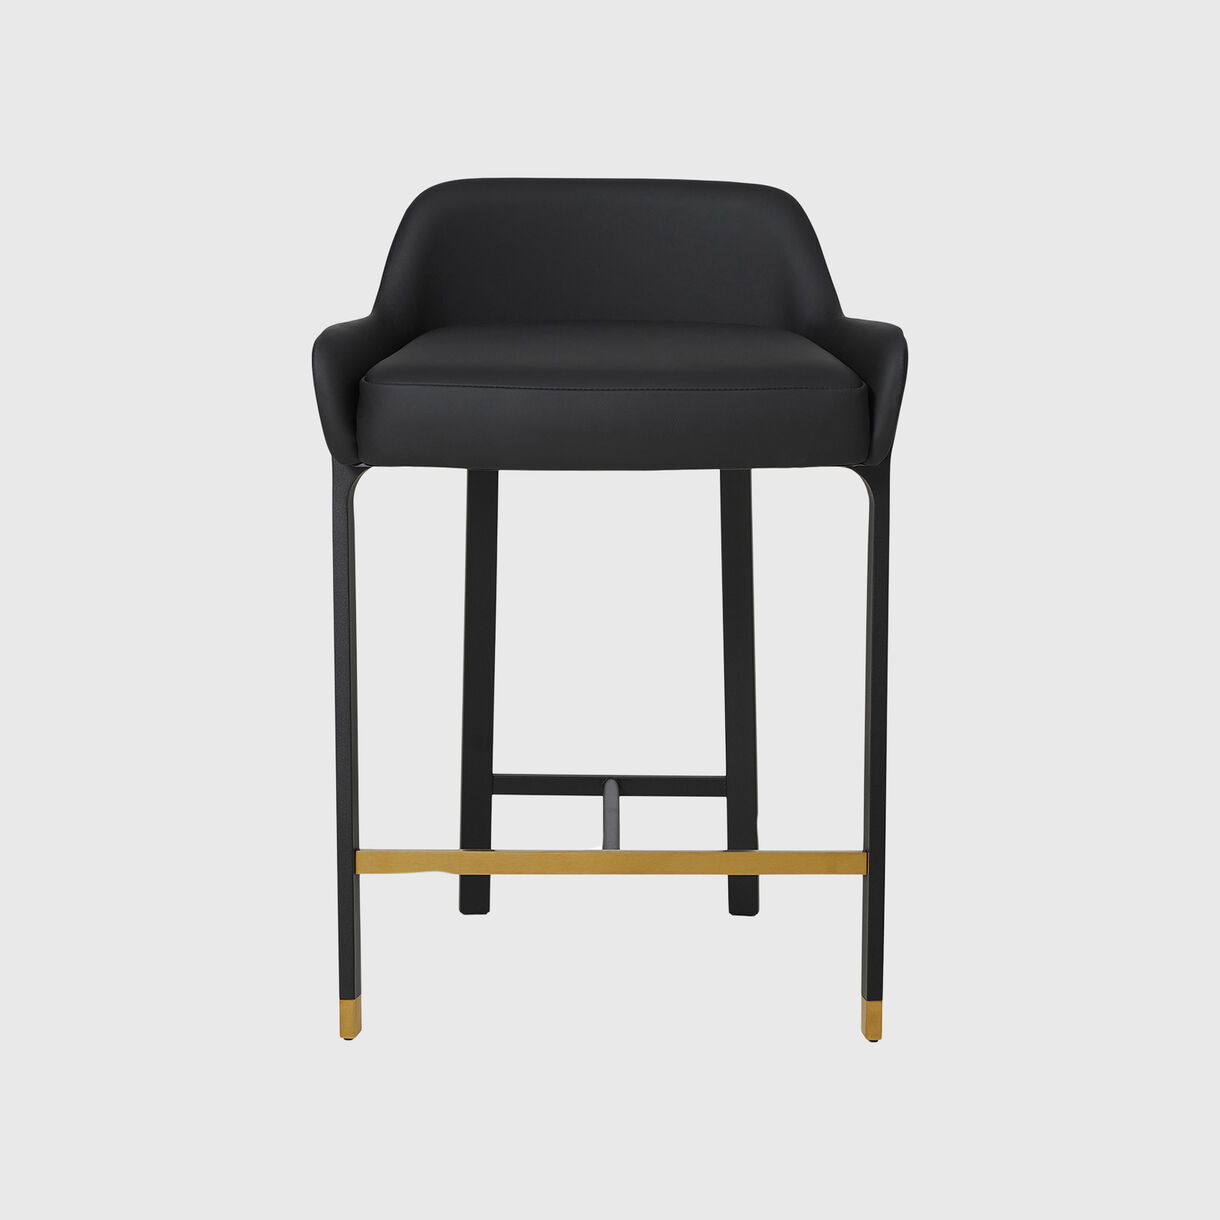 Blink Stool, Counter, Bellagio Leather - Black 7925